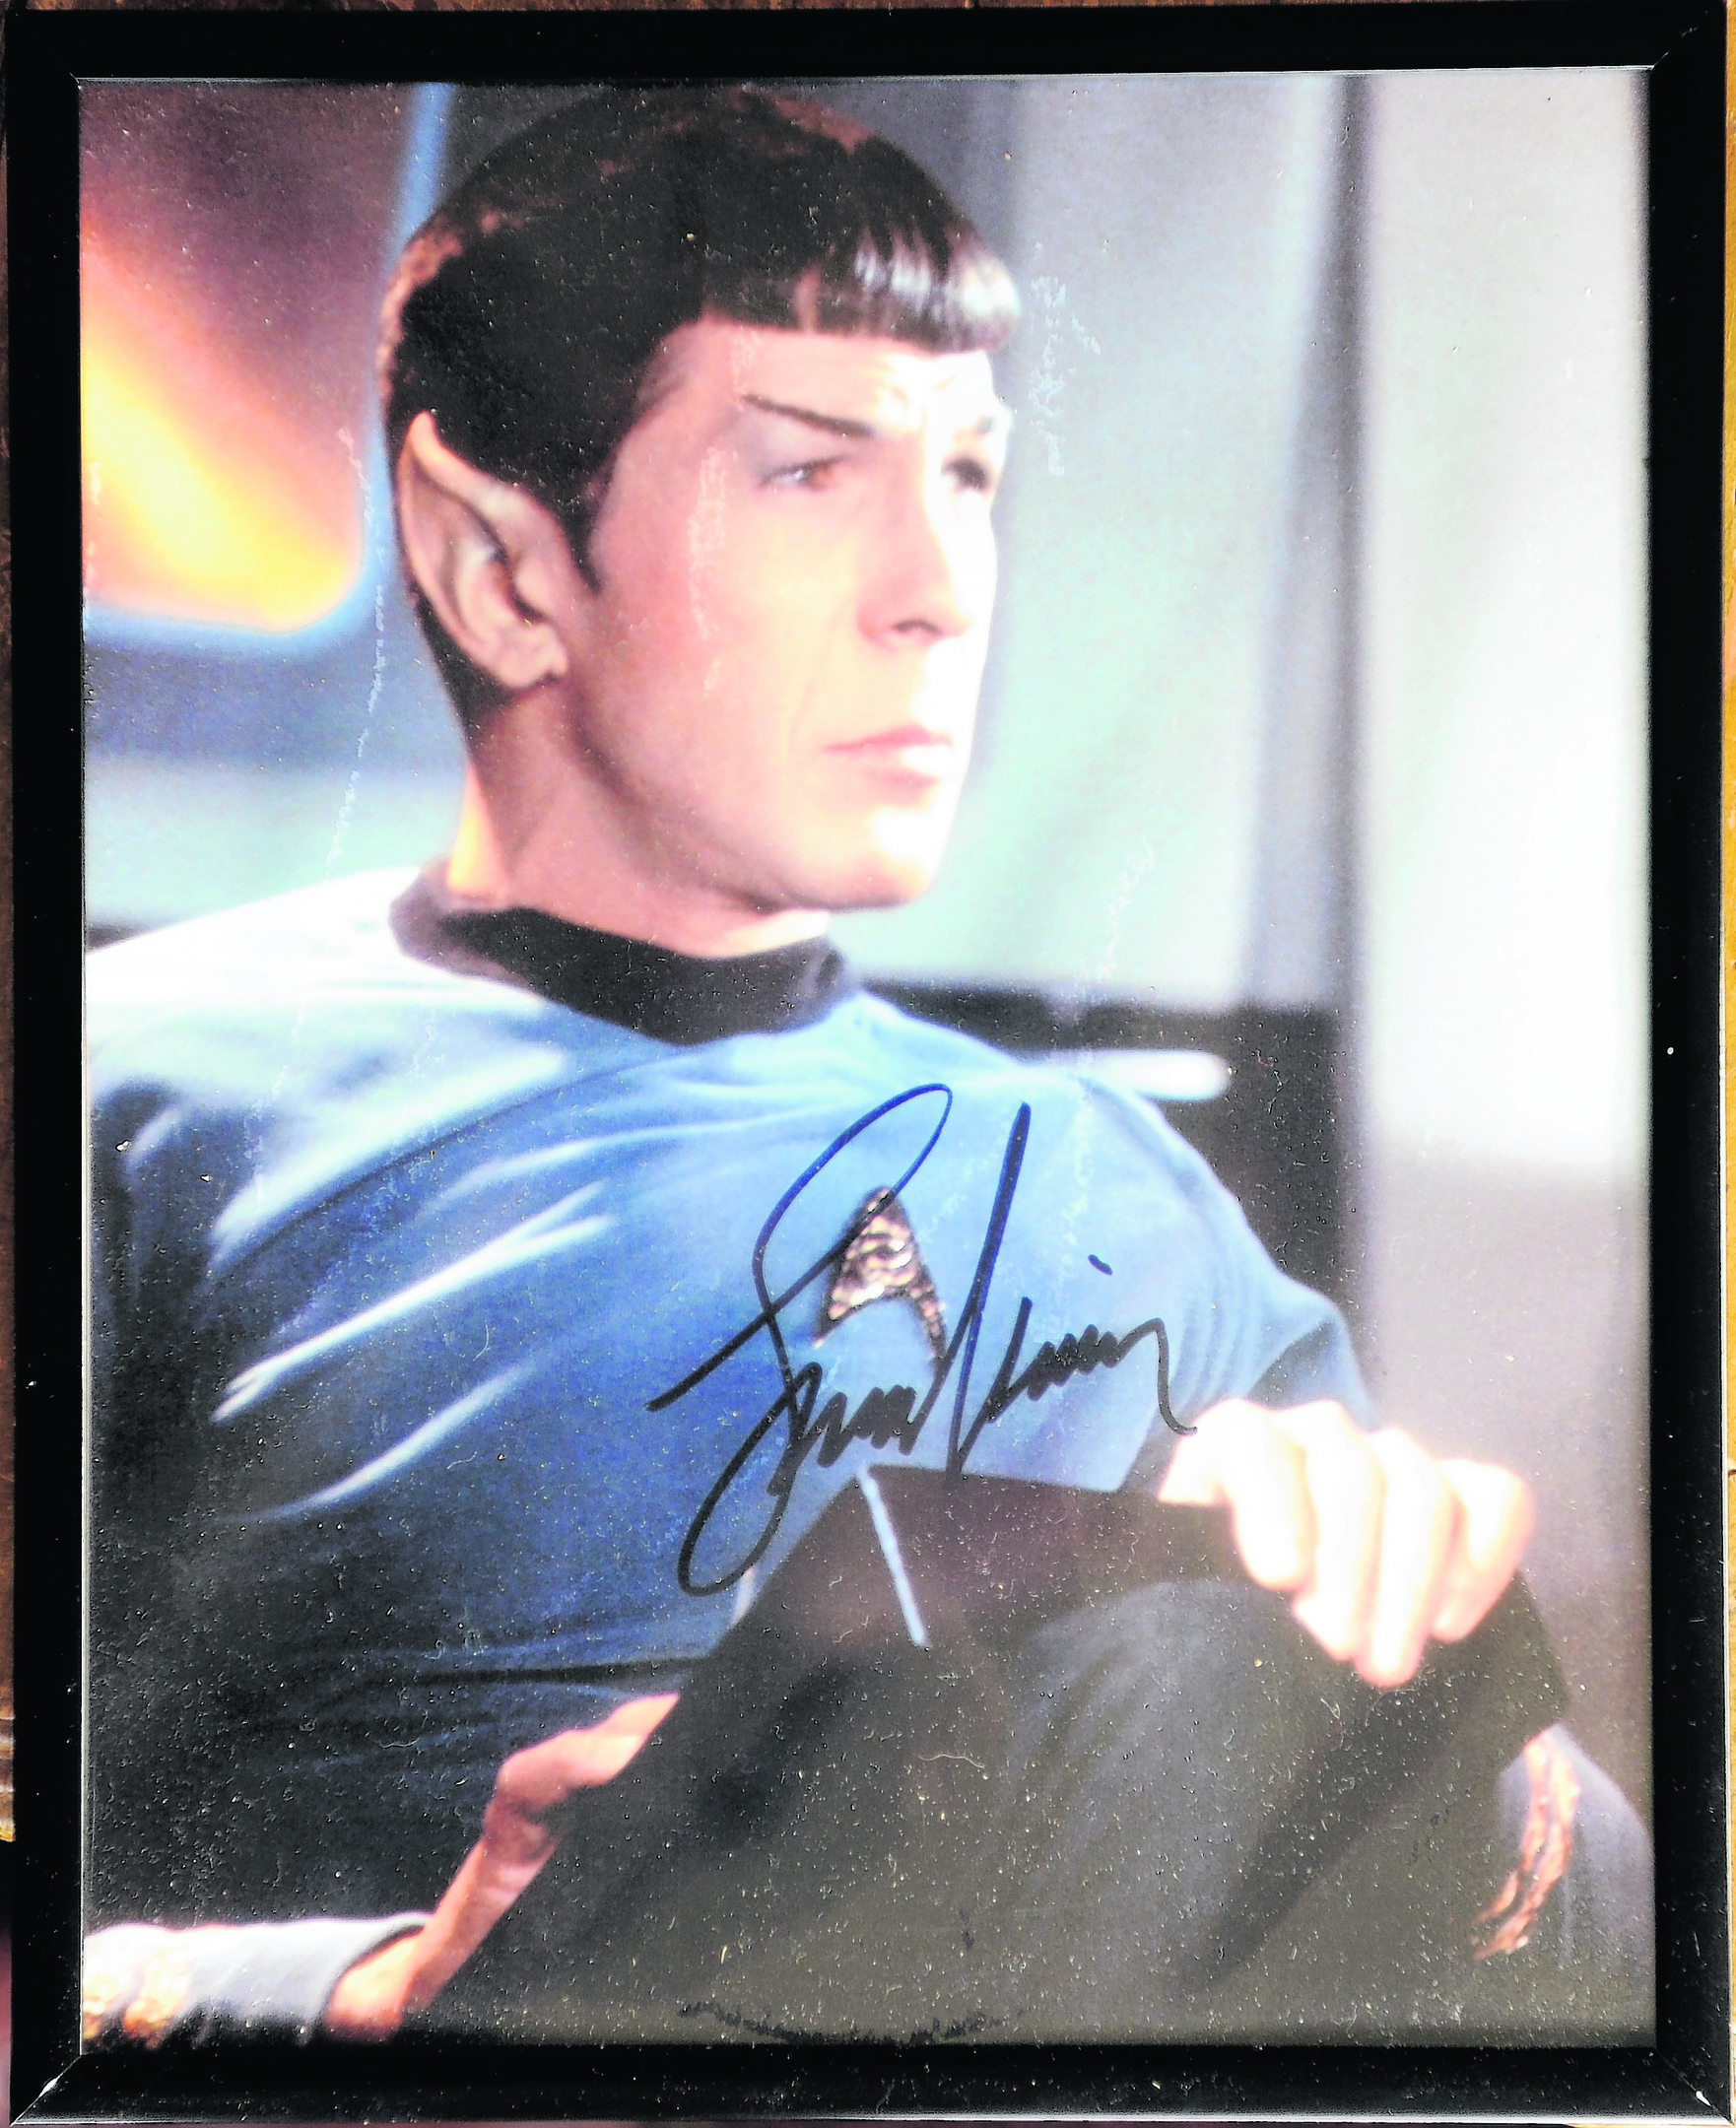 The real Spock from Star Trek